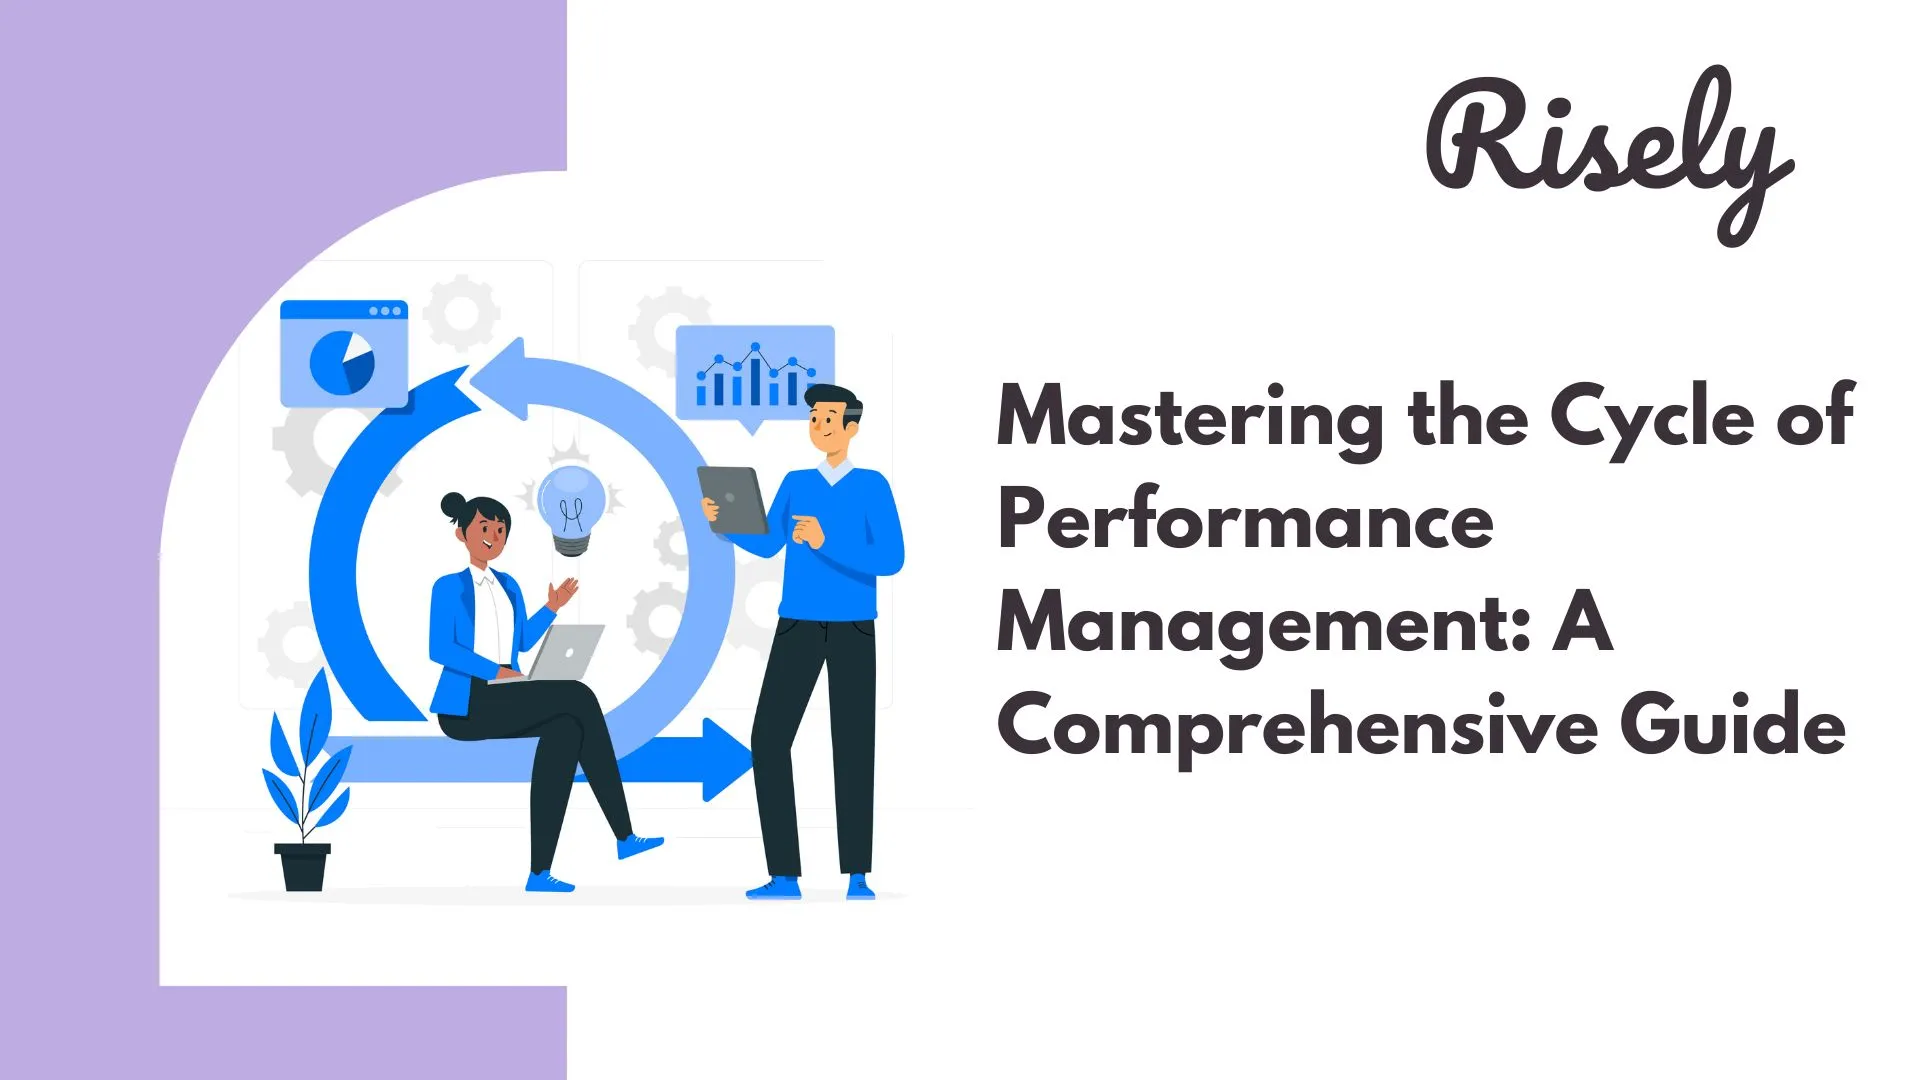 Mastering the Cycle of Performance Management: A Comprehensive Guide